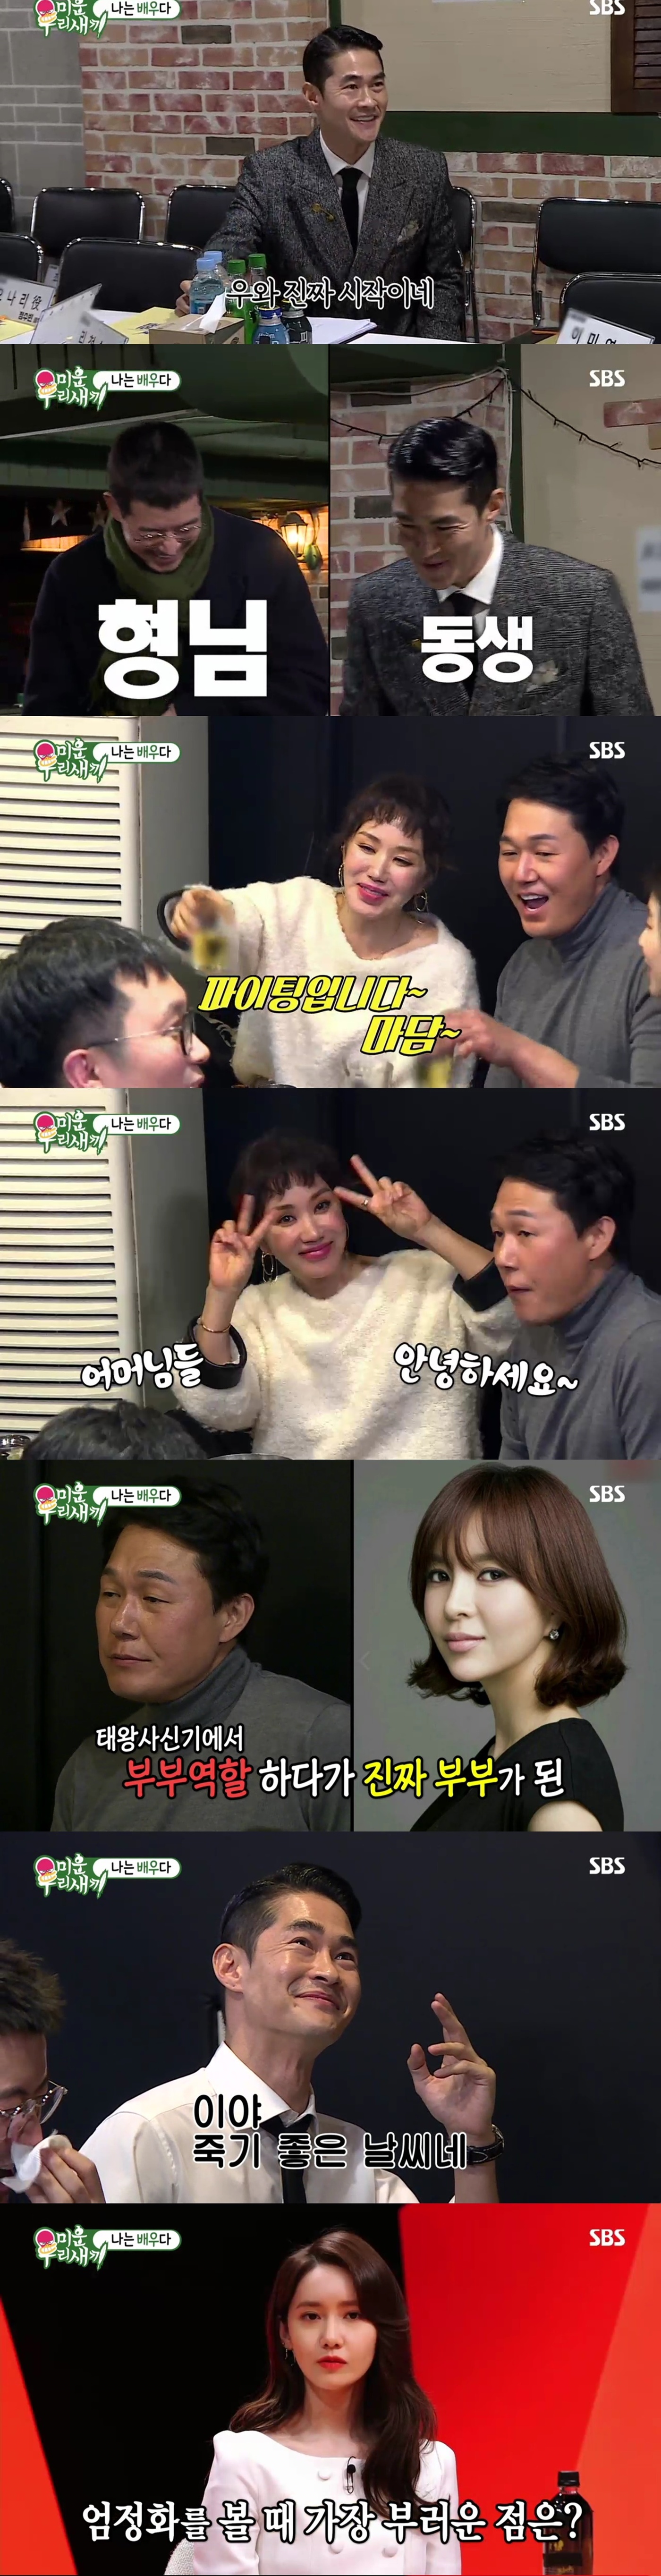 SBS Ugly Our Little (hereinafter referred to as Ugly Bird), which was broadcast on March 31, was featured by Girls Generation Im Yoon-ah as a special MC after last week, and received the love of mothers in one body.When Im Yoon-ah said that he was the center for visuals at the Girls Generation, his mothers also introduced their roles in Miwoo Bird.Tonys mother laughed at 39 gold, saying that she was in charge of adult humor.Im Yoon-ah envied that Uhm Jung-hwa, along with Bae Jin-nam, was on the screen and Uhm Jung-hwa was a great person who makes trends every field.Also, for Actor, who has a good breathing, he said, It is the most recent work together.It will fit well with whoever you are and who you are.Bae Jin-nam, who gathered his attention in a nice suit, unveiled his first script reading scene and dinner place with cast actors such as Uhm Jung-hwa, Park Sung-woong and Lee Sang-yoon.Bae Jin-nam boasted about Uhm Jung-hwa and his best friend Chemie, who had been acquainted for 15 years.Bae Jin-nam took care of Uhm Jung-hwa and said, I lost a lot of weight. How do you not eat one meal? Uhm Jung-hwa said, I took it out because of you.Your face is small, he tittered.When Bae Jin-nam recommended the appearance of Mirror Bird, he laughed, saying, When I go out, my mother looks at me and does not want to marry.The mothers in the studio also sent a love call saying, My son can not go, but ... please come out once.Park Sung-woong has revealed the love story of Shin Eun-jung and the couple who became a couple through the drama Taewang Sasingi.On the other hand, Miwoo Sae continued to be the number one performer in the Sunday entertainment industry with 19.1% of the nationwide ratings and 23.1% of the second part based on Nielsen Korea.MBC Hogus Love, which was broadcasted on the same time period, recorded 2.4% in the first part, 2.3% in the second part, and 6.2% in KBS Gag Concert.